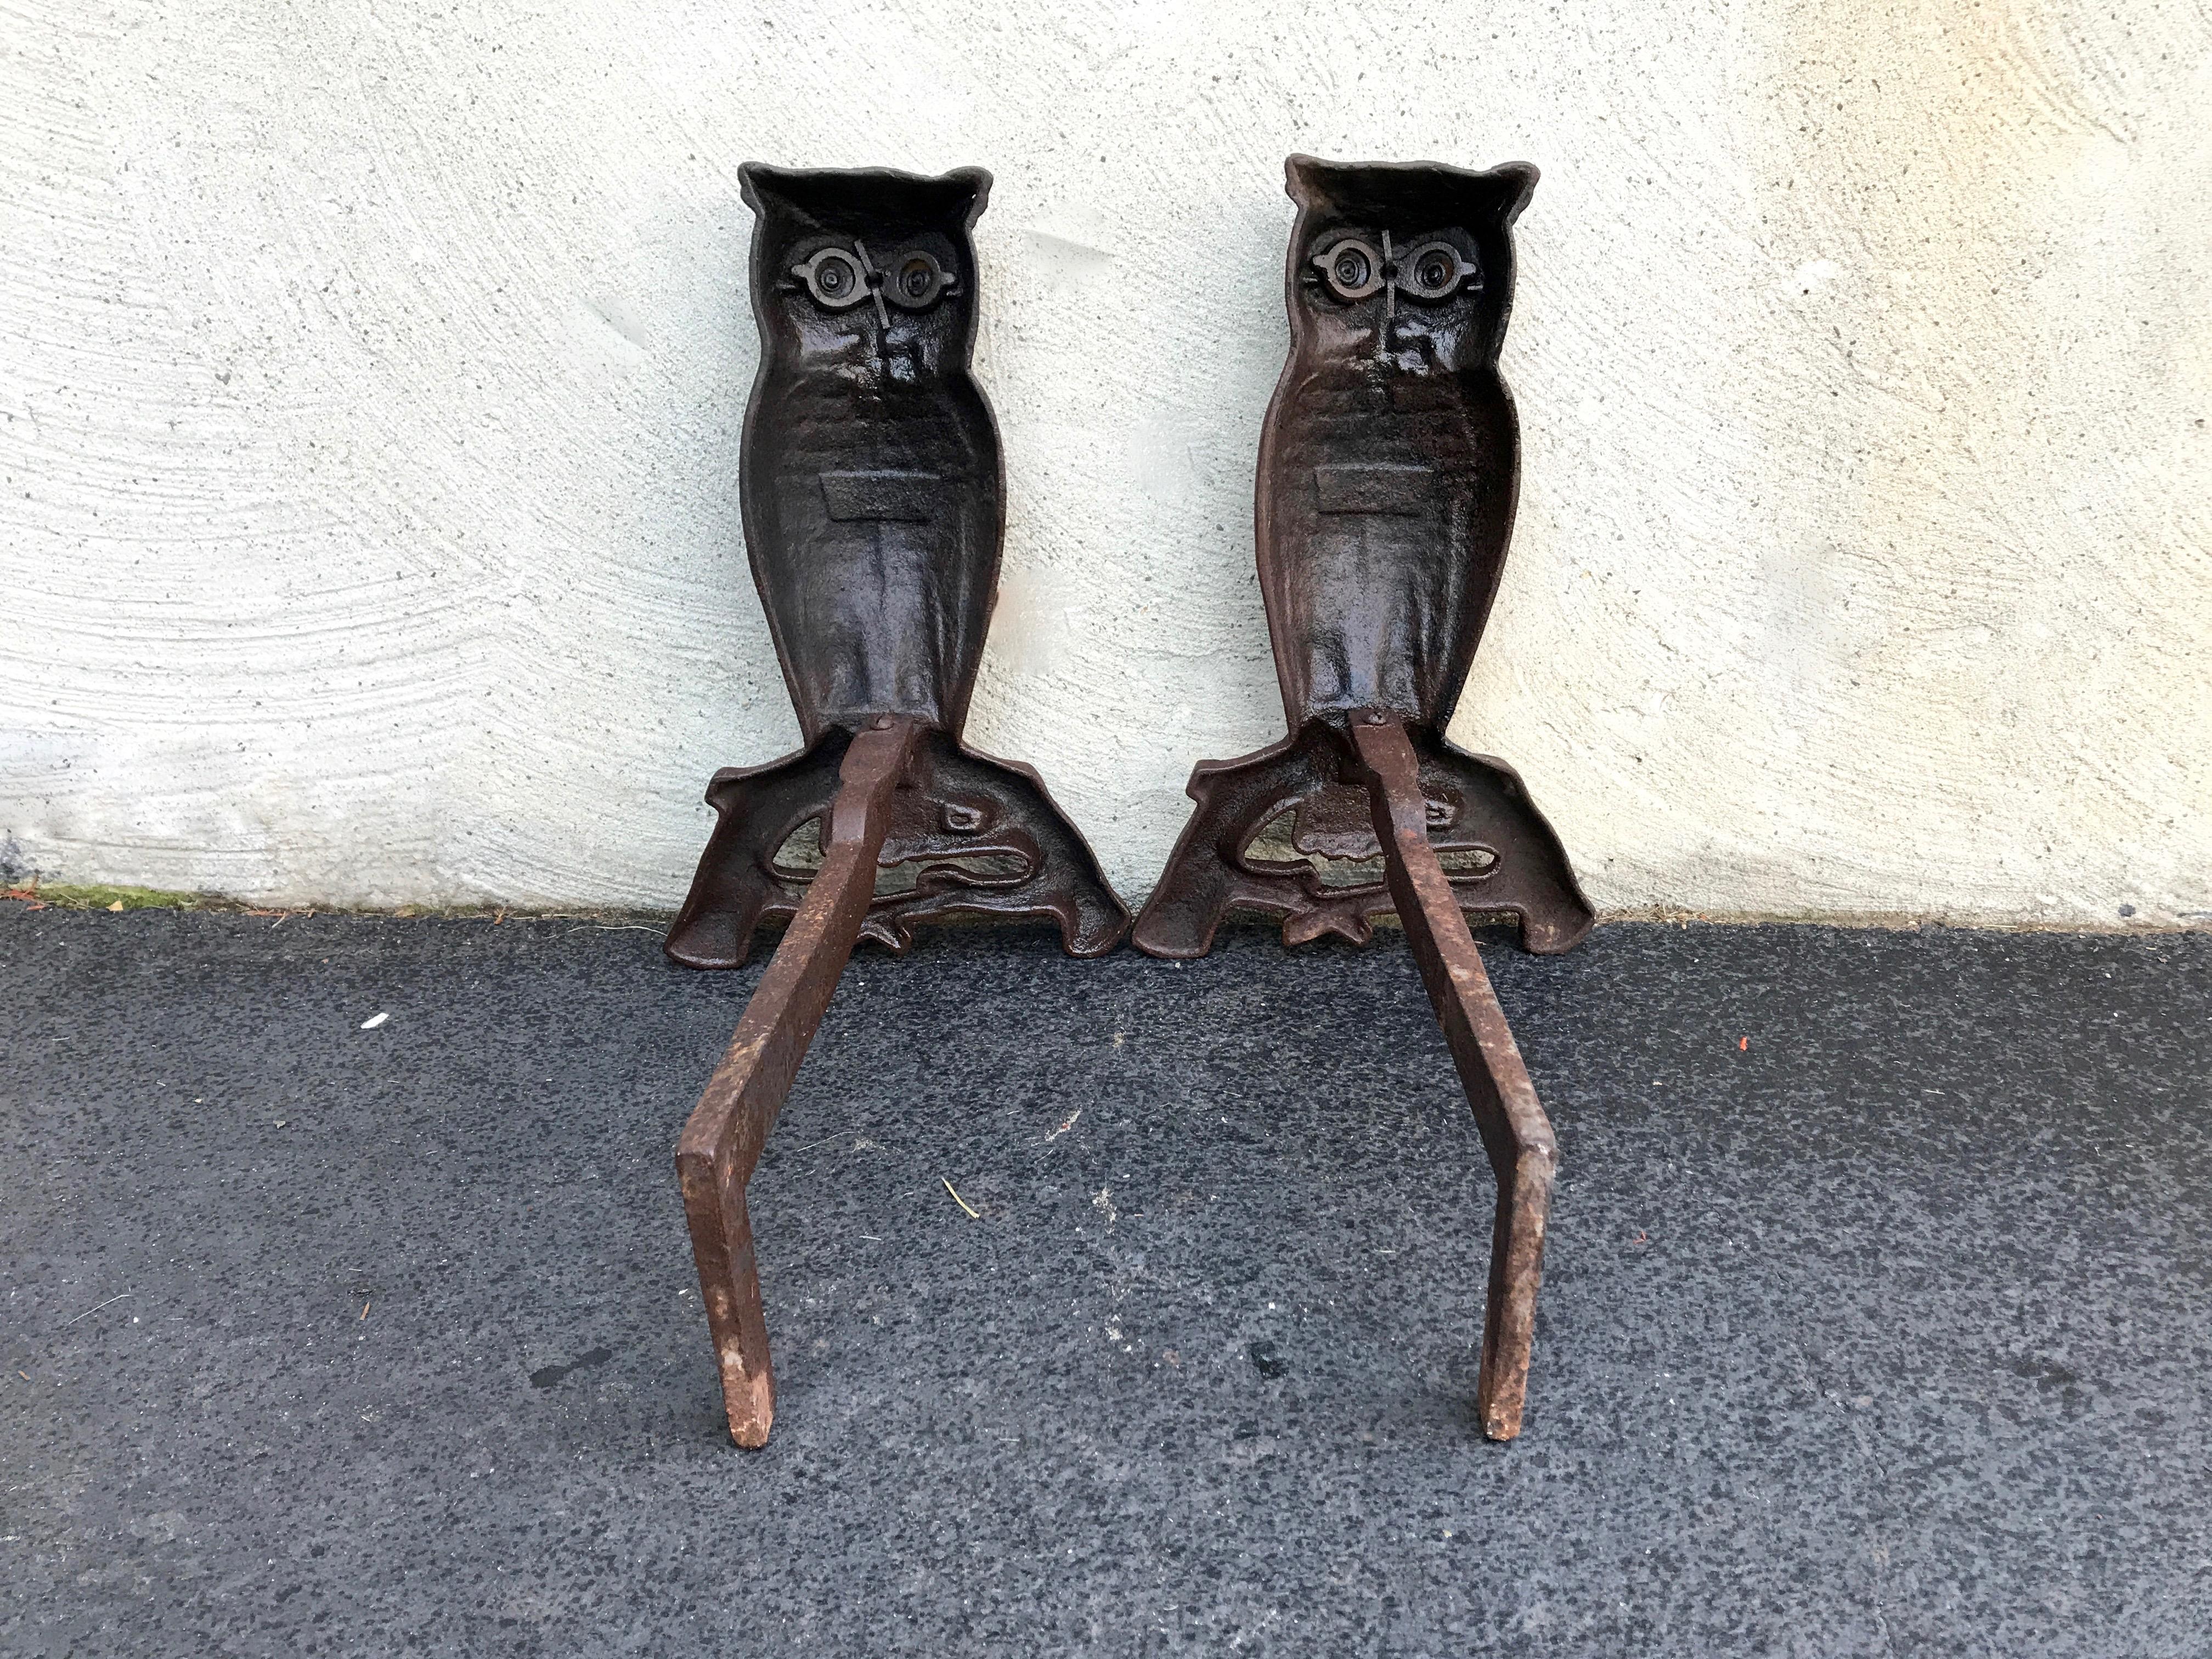 American Colonial Cast Iron Owl Andirons with Glass Eyes, Late 19th Century Westport, Ma